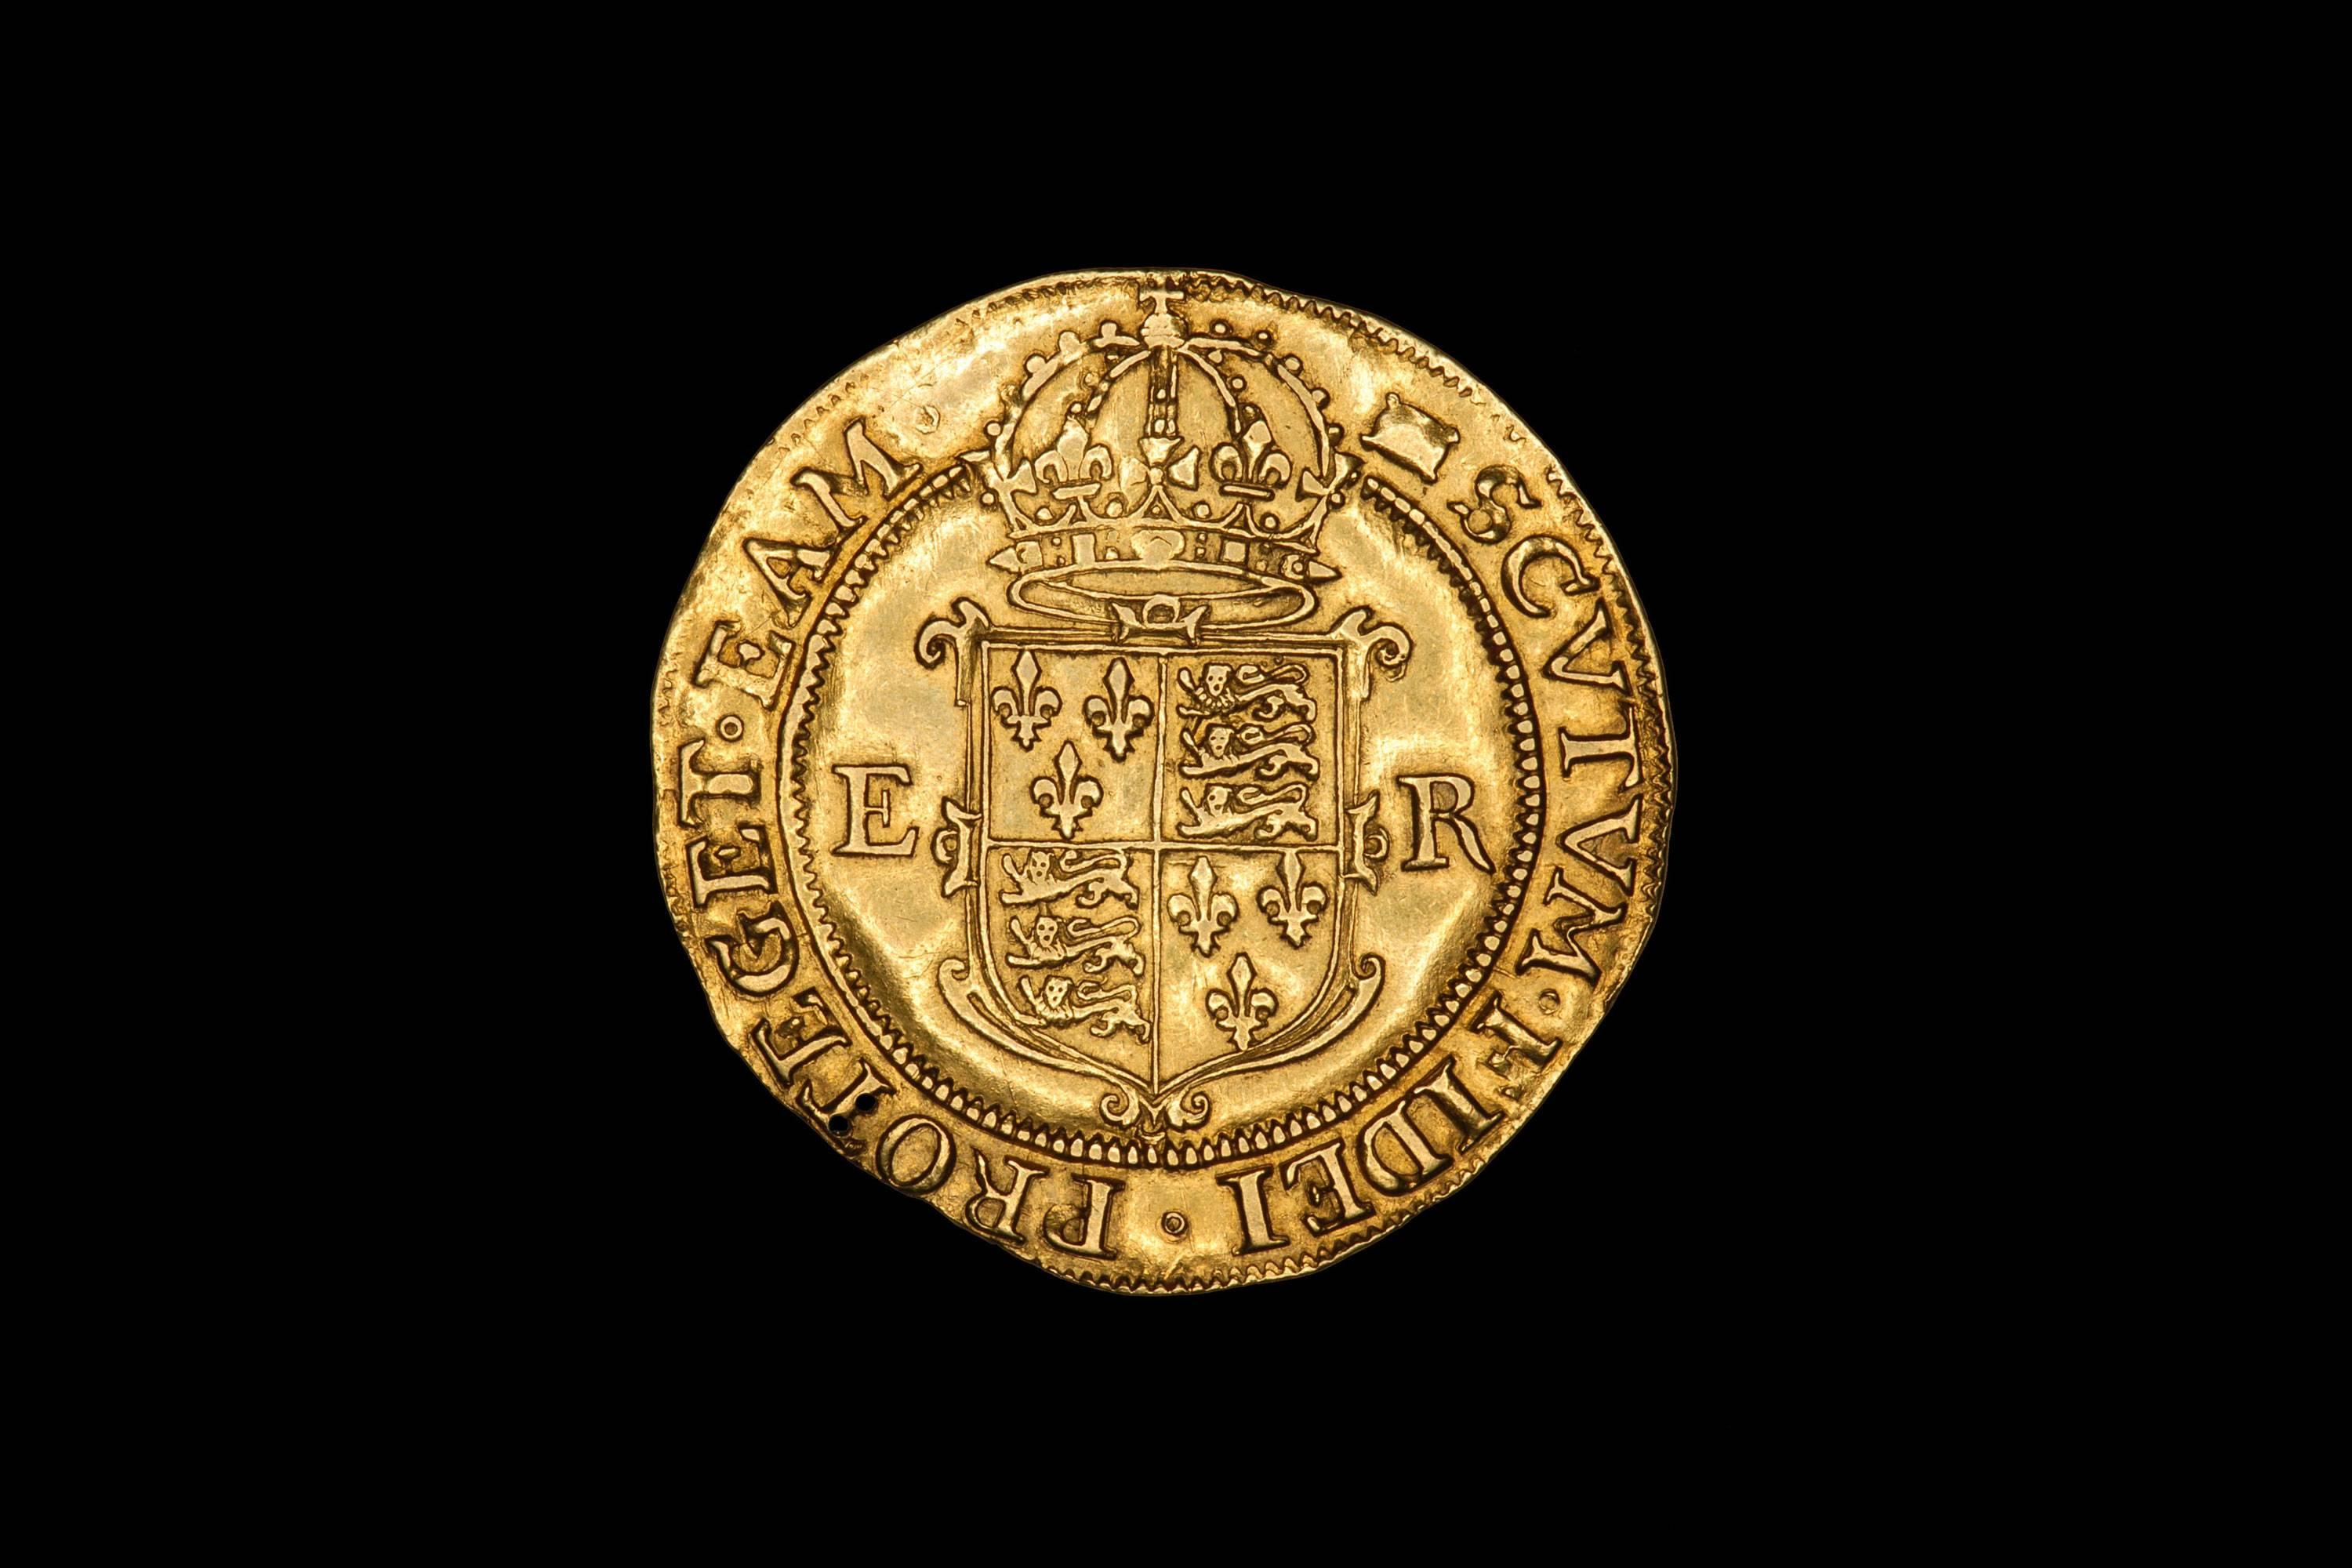 A superb example of what is probably the most iconic coin type of England's last Tudor monarch.

It has previously been noted that the Pound is 'perhaps the most attractive of all the gold coins of the Tudor period. Although the first English